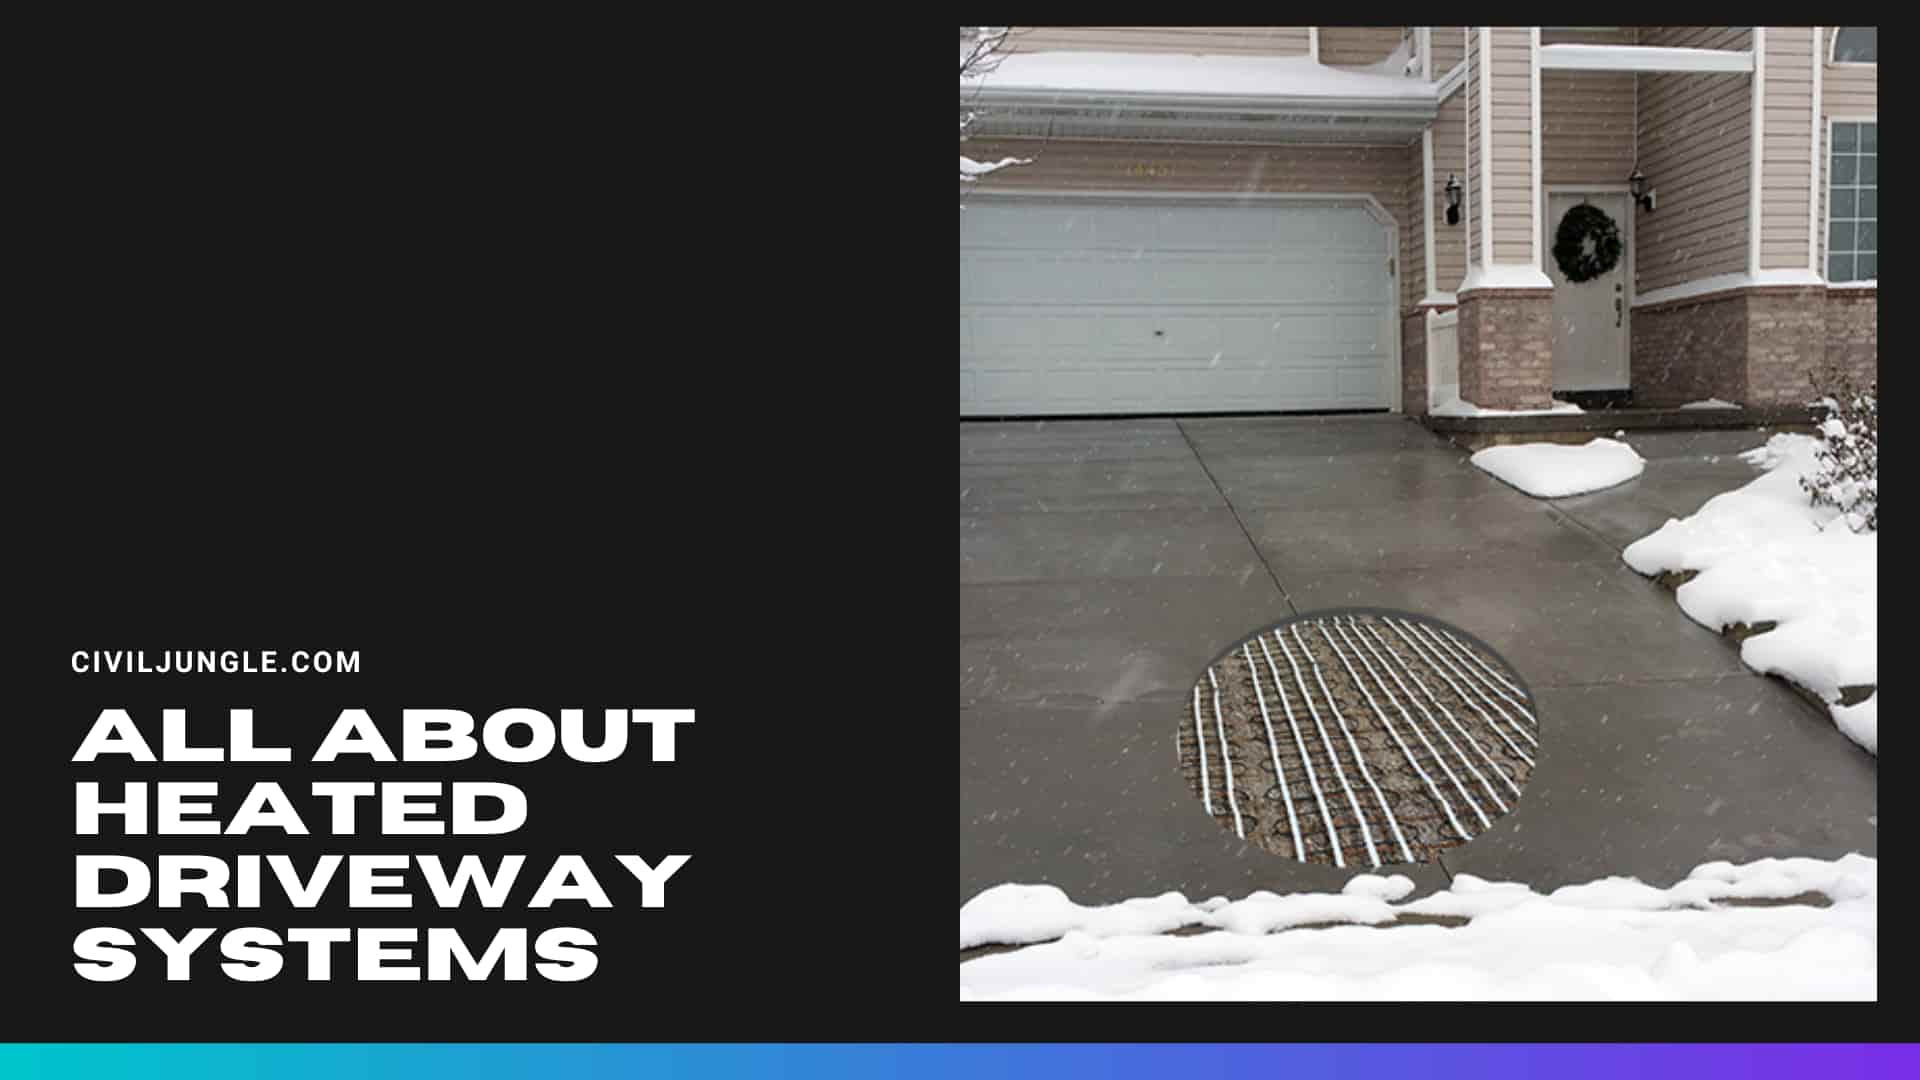 All About Heated Driveway Systems